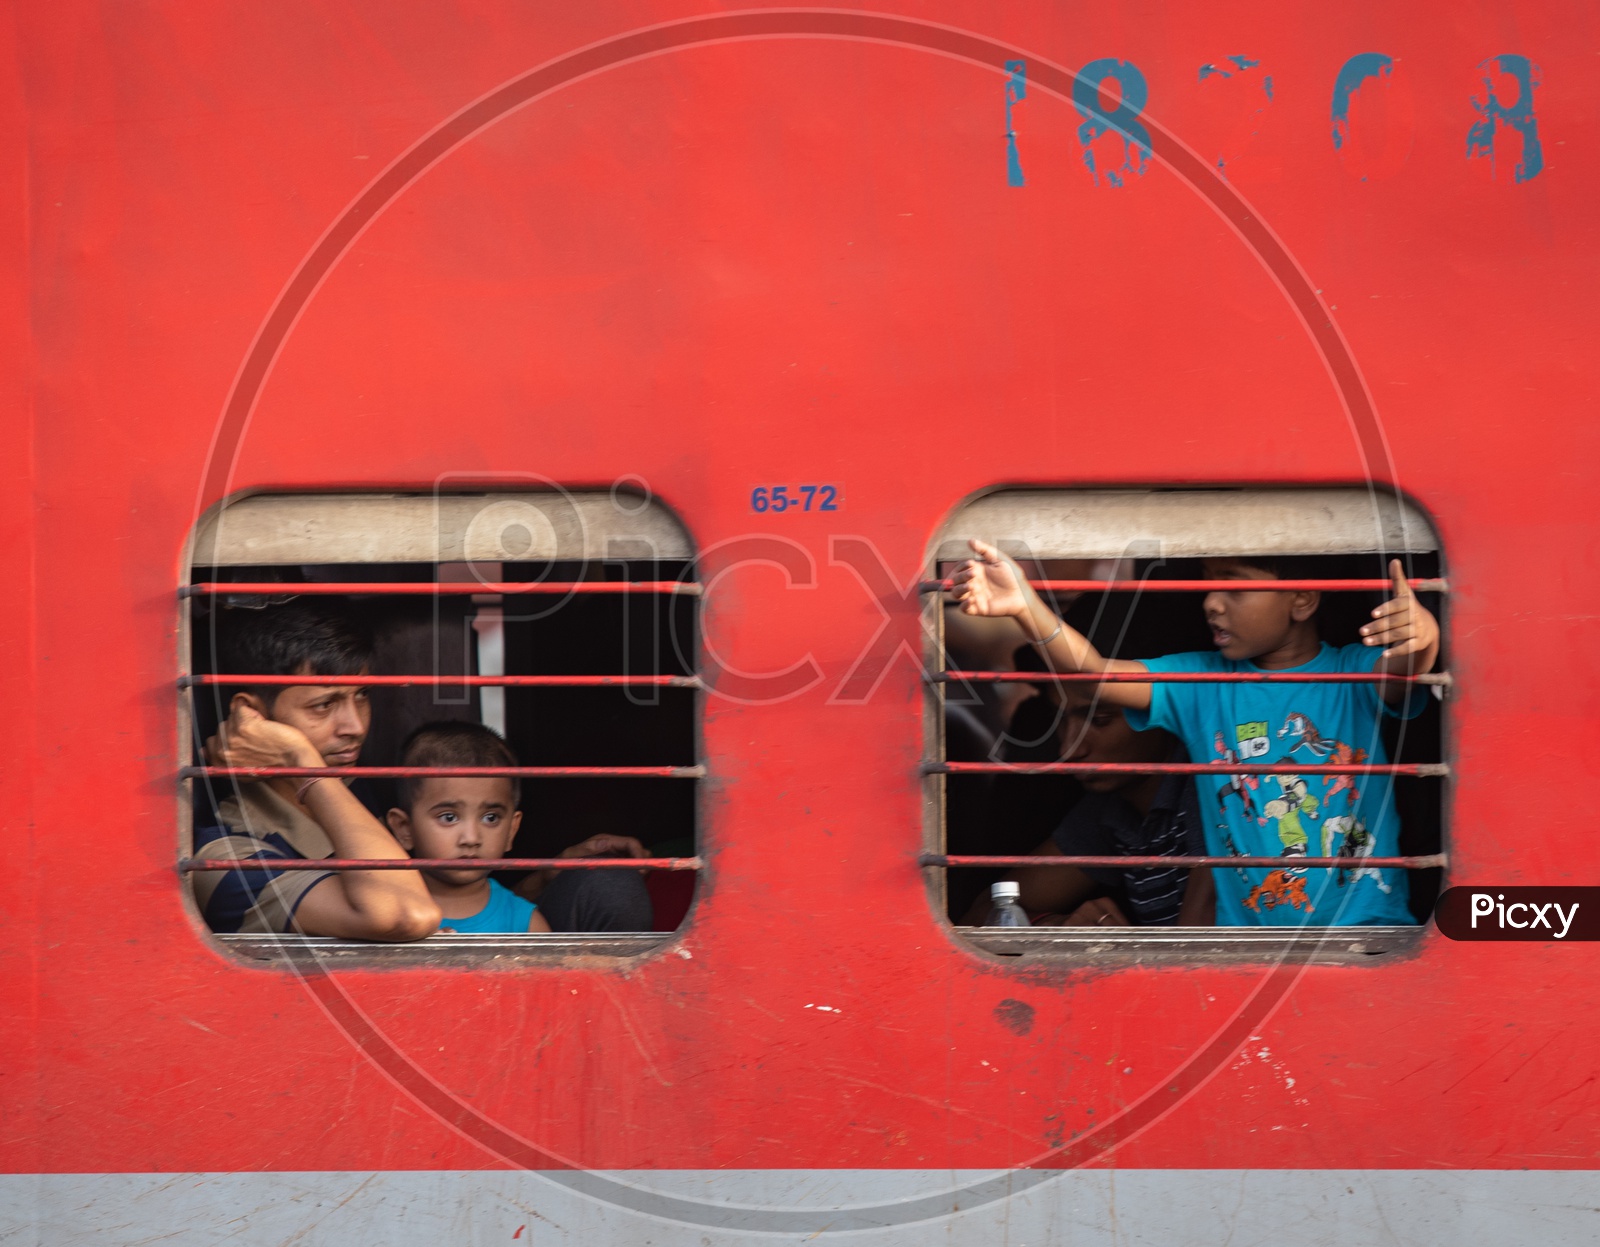 Indian Children Sitting At a train Window Seat And Looking Through The Window  In an Indan Railway Train Coach Or Bogie